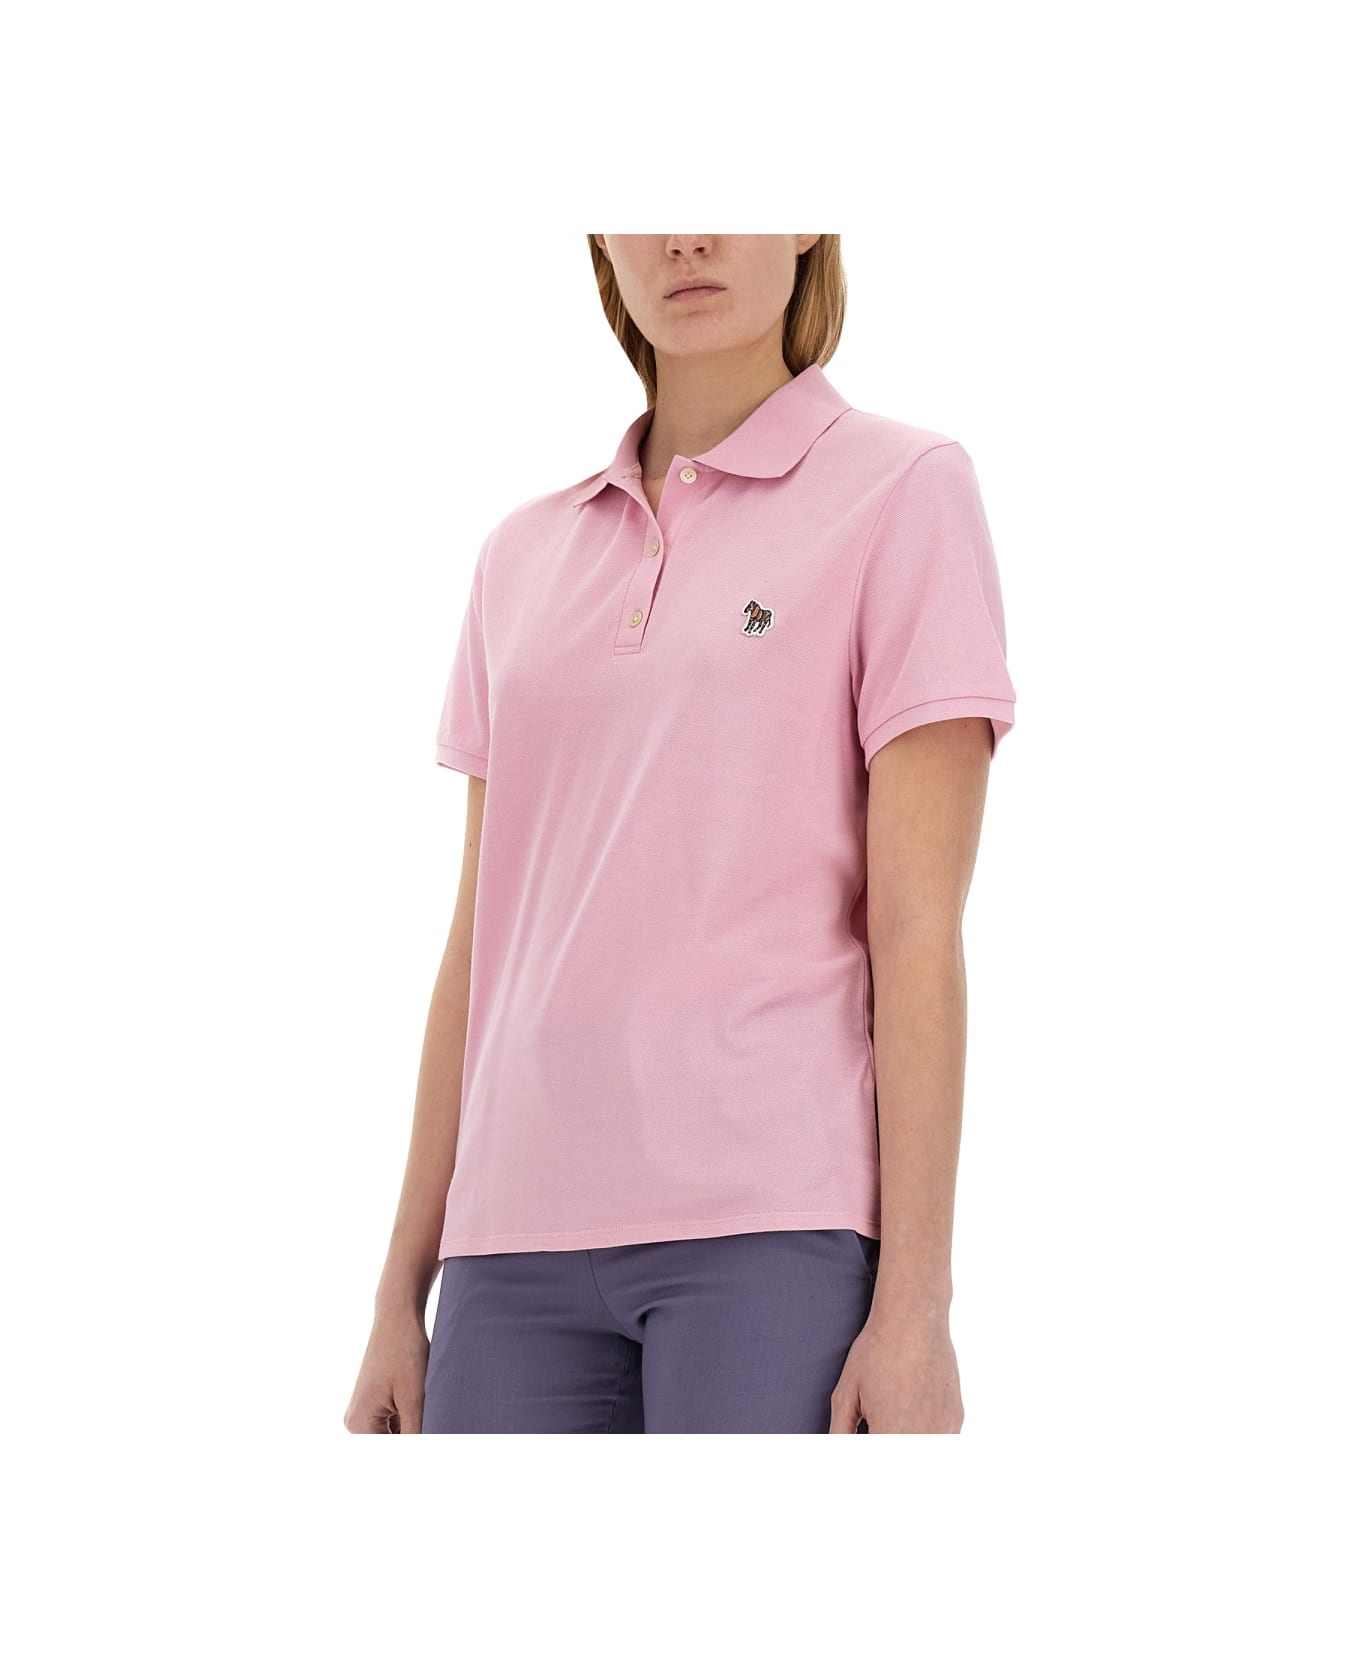 PS by Paul Smith "zebra" Polo. - PINK ポロシャツ